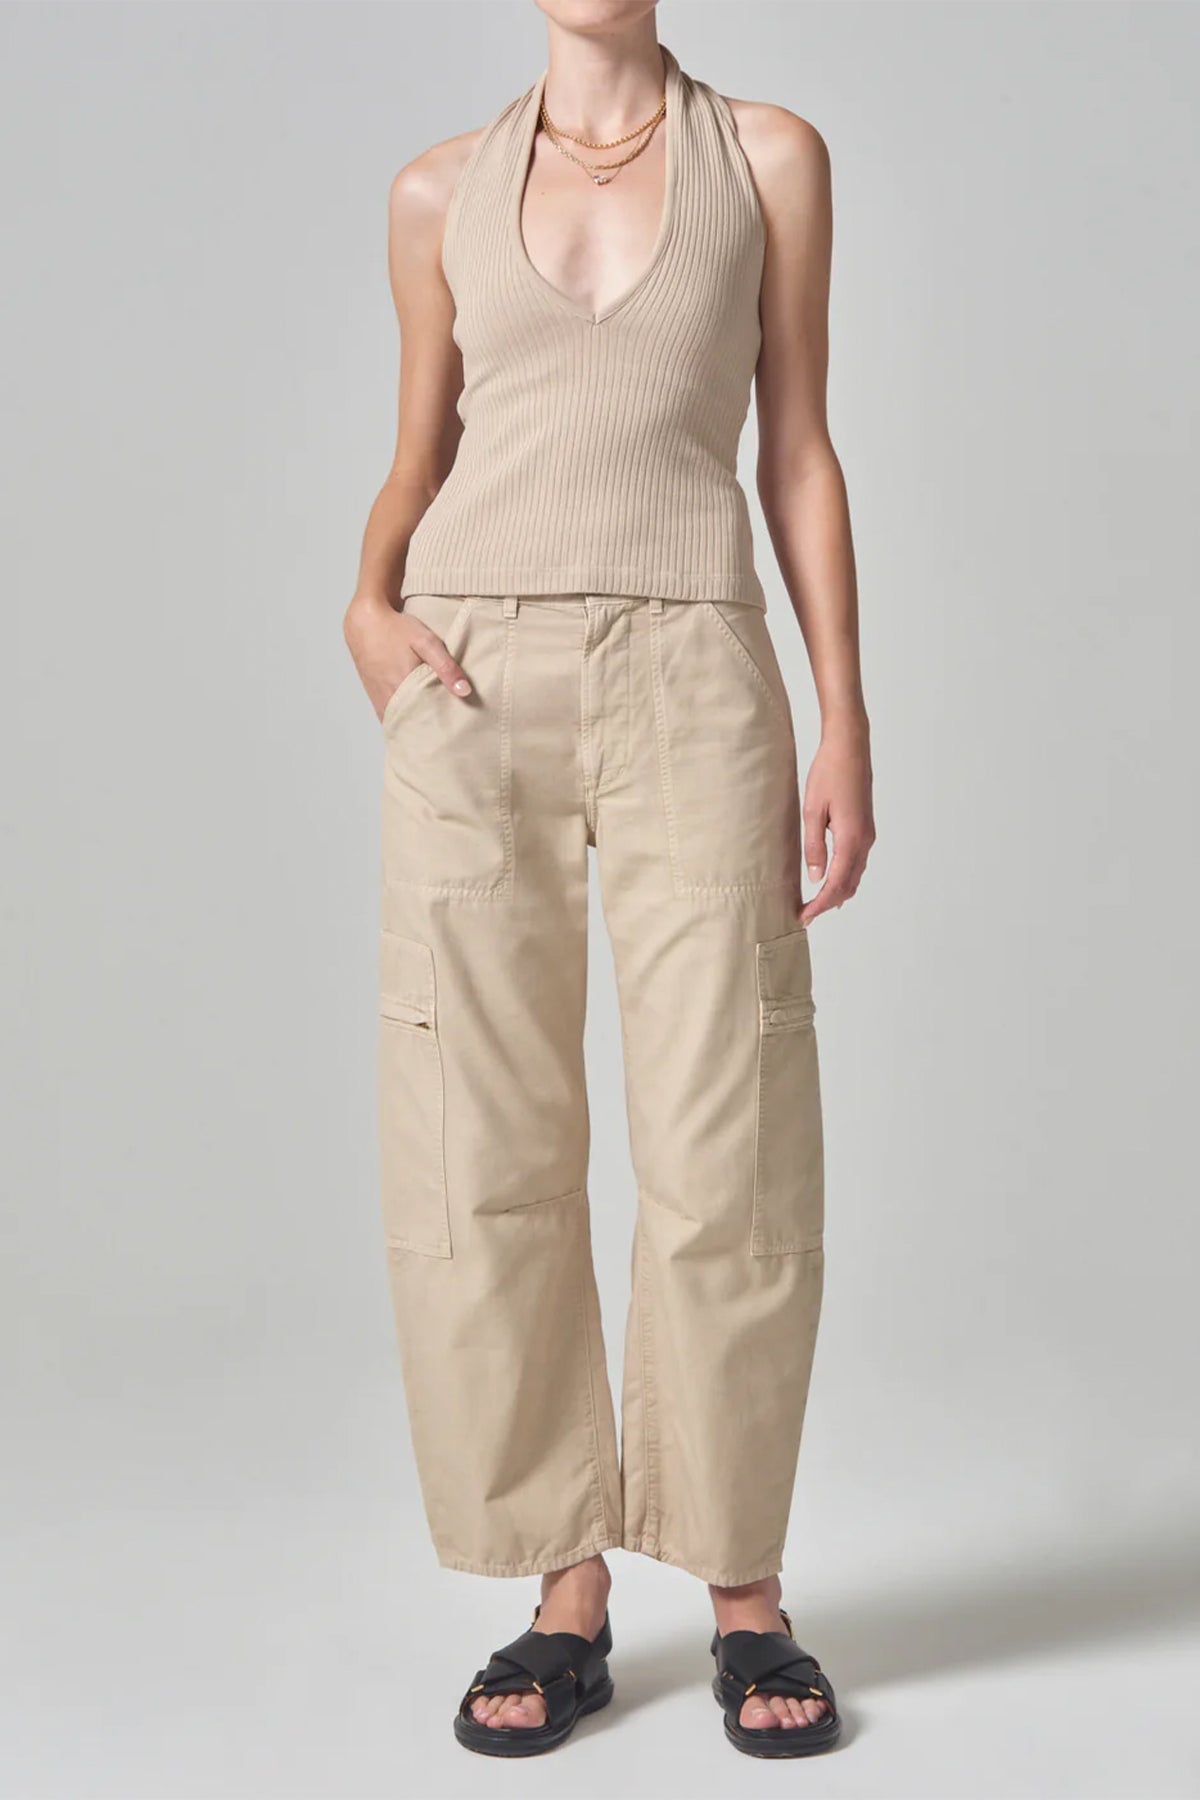 Marcelle Low Slung Easy Cargo in Taos Sand - shop-olivia.com